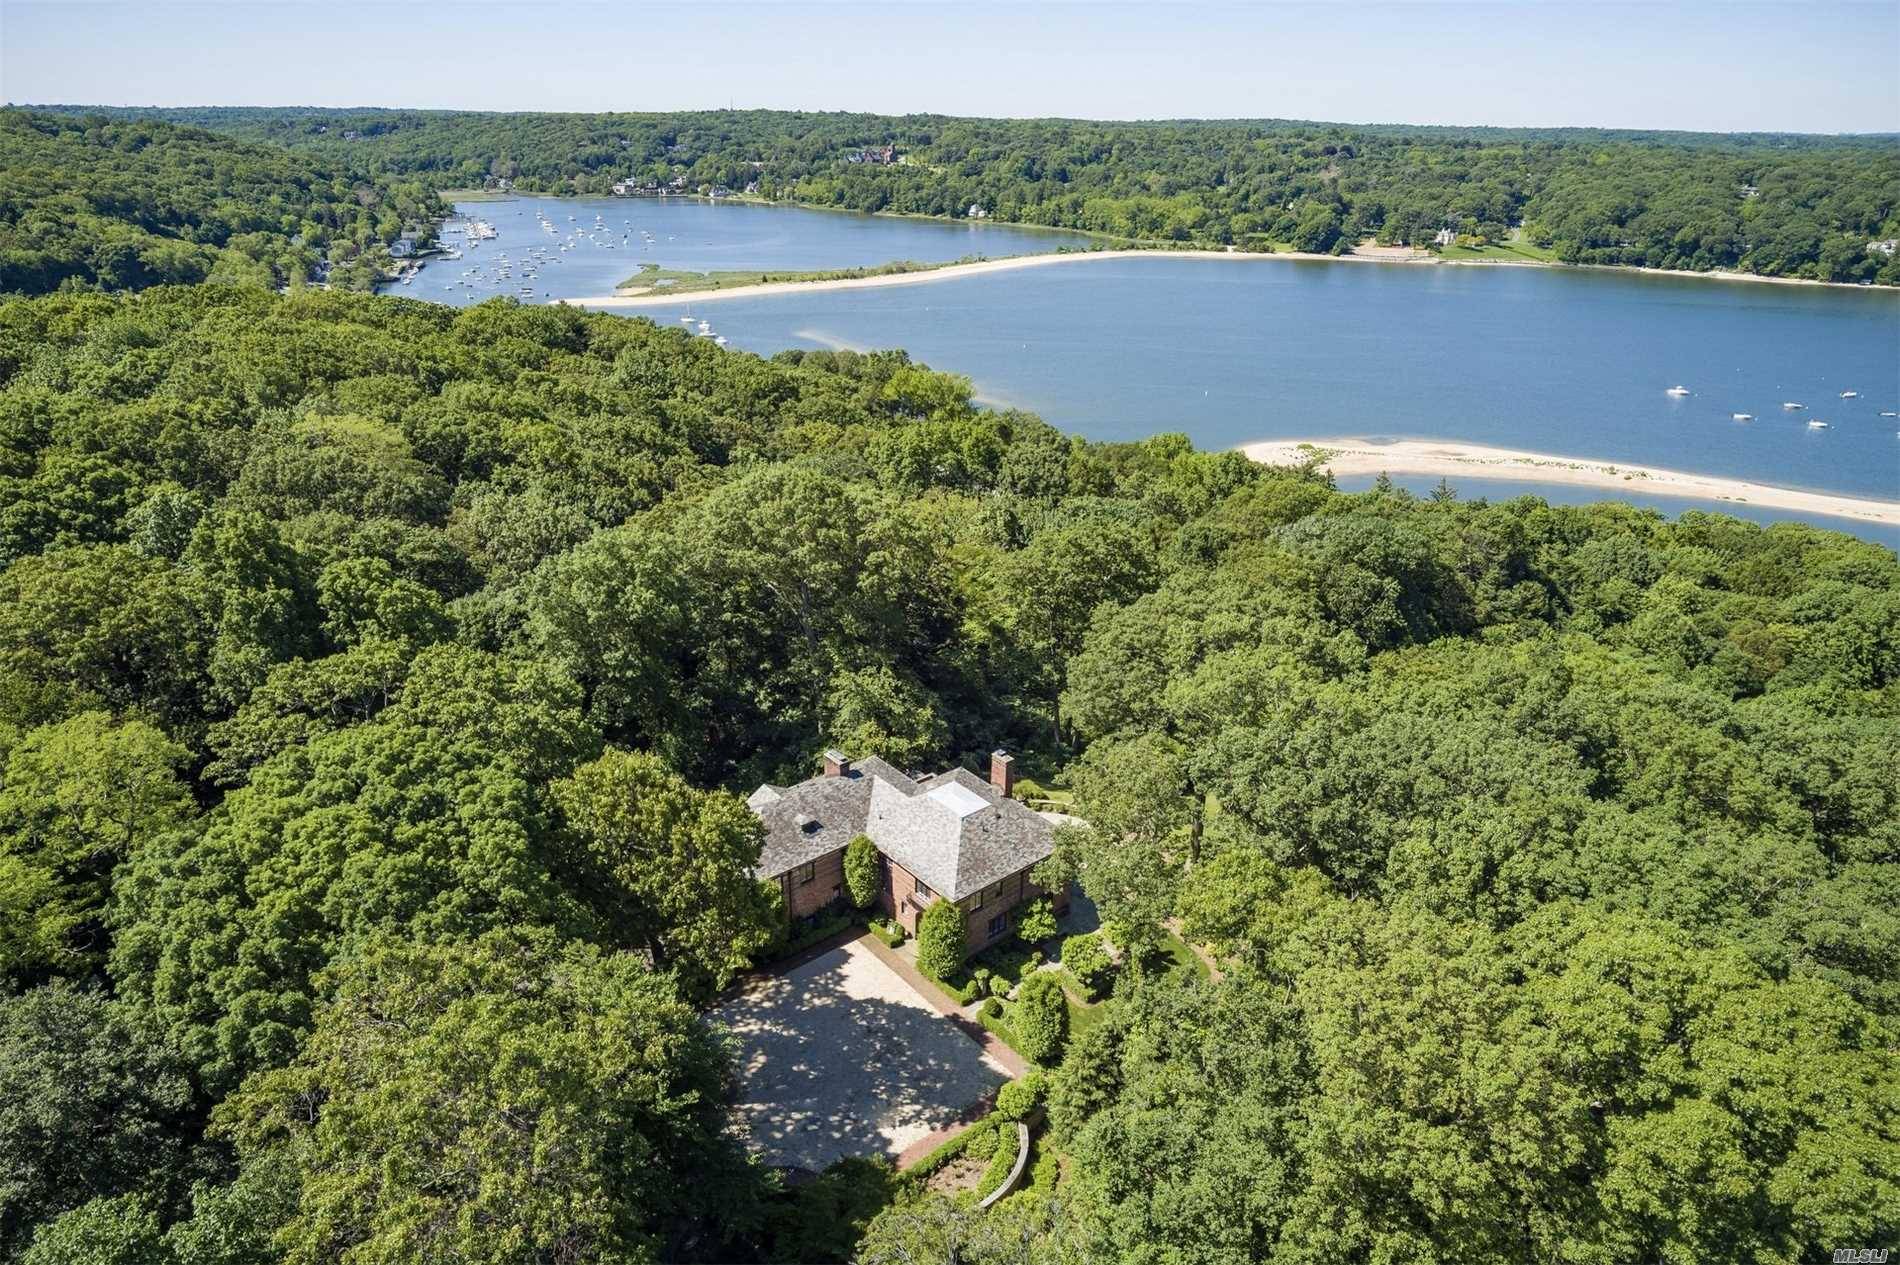 A Stately 16 Room Retreat just an hour from Manhattan with Waterviews over Cold Spring Harbor surrounded by a Lush 2 Acres at end of Private Road.